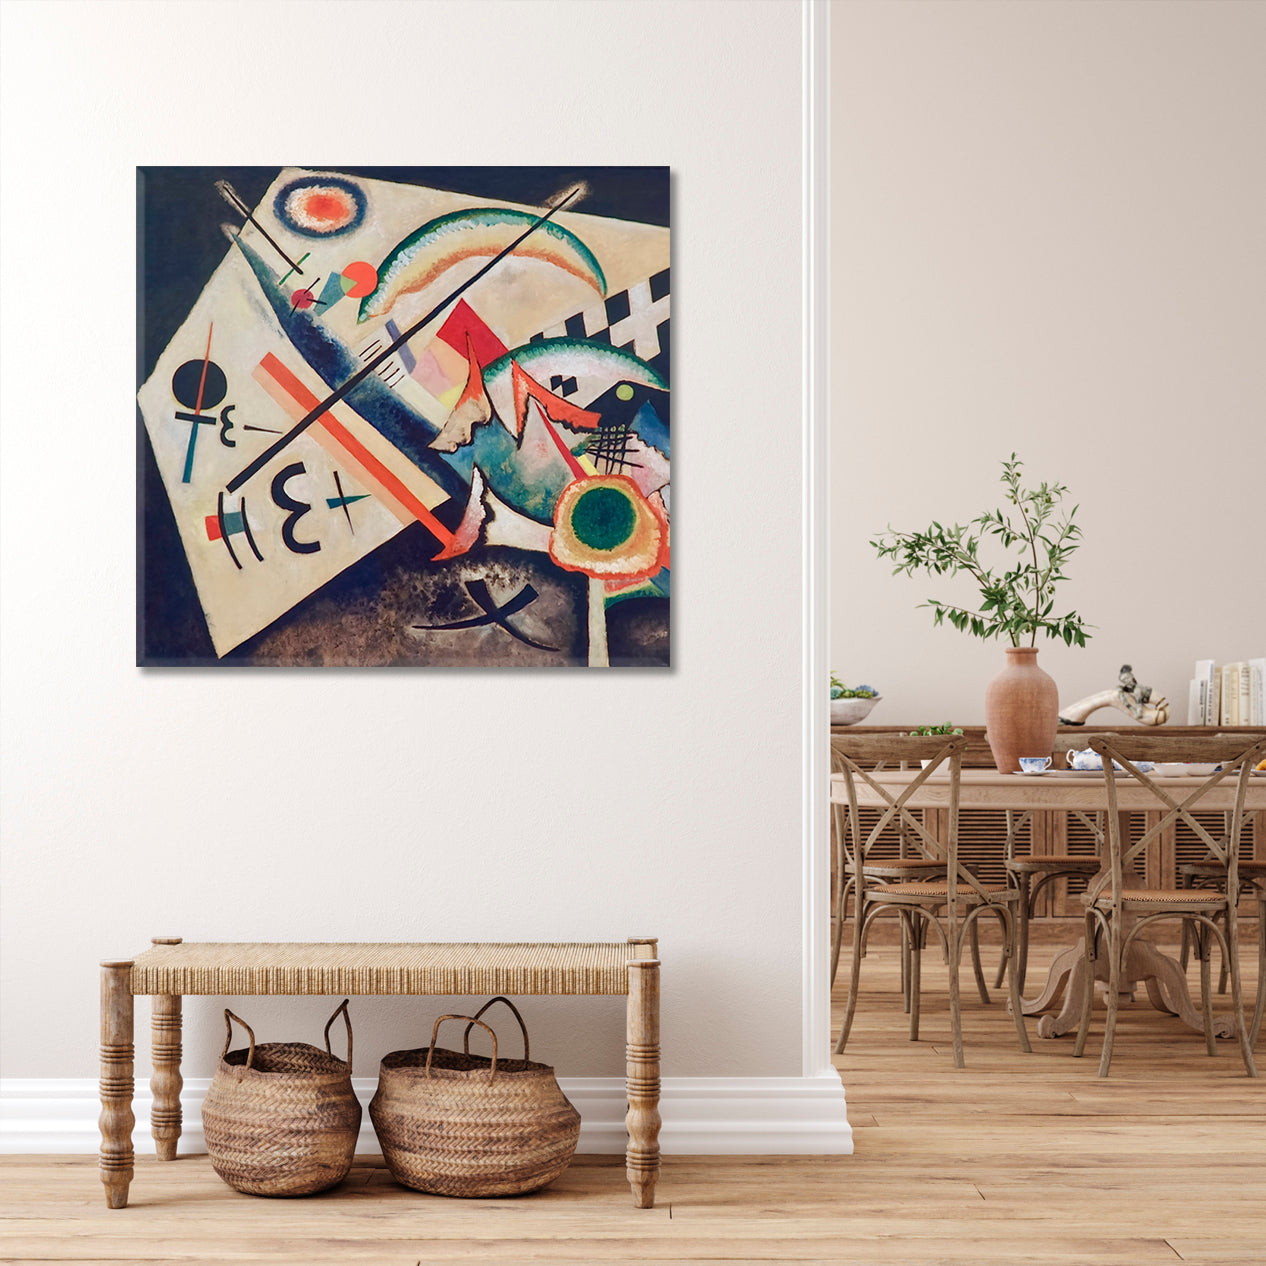 INSPIRED BY KANDINSKY Abstract Figurative Modern Painting Contemporary Art Artesty   